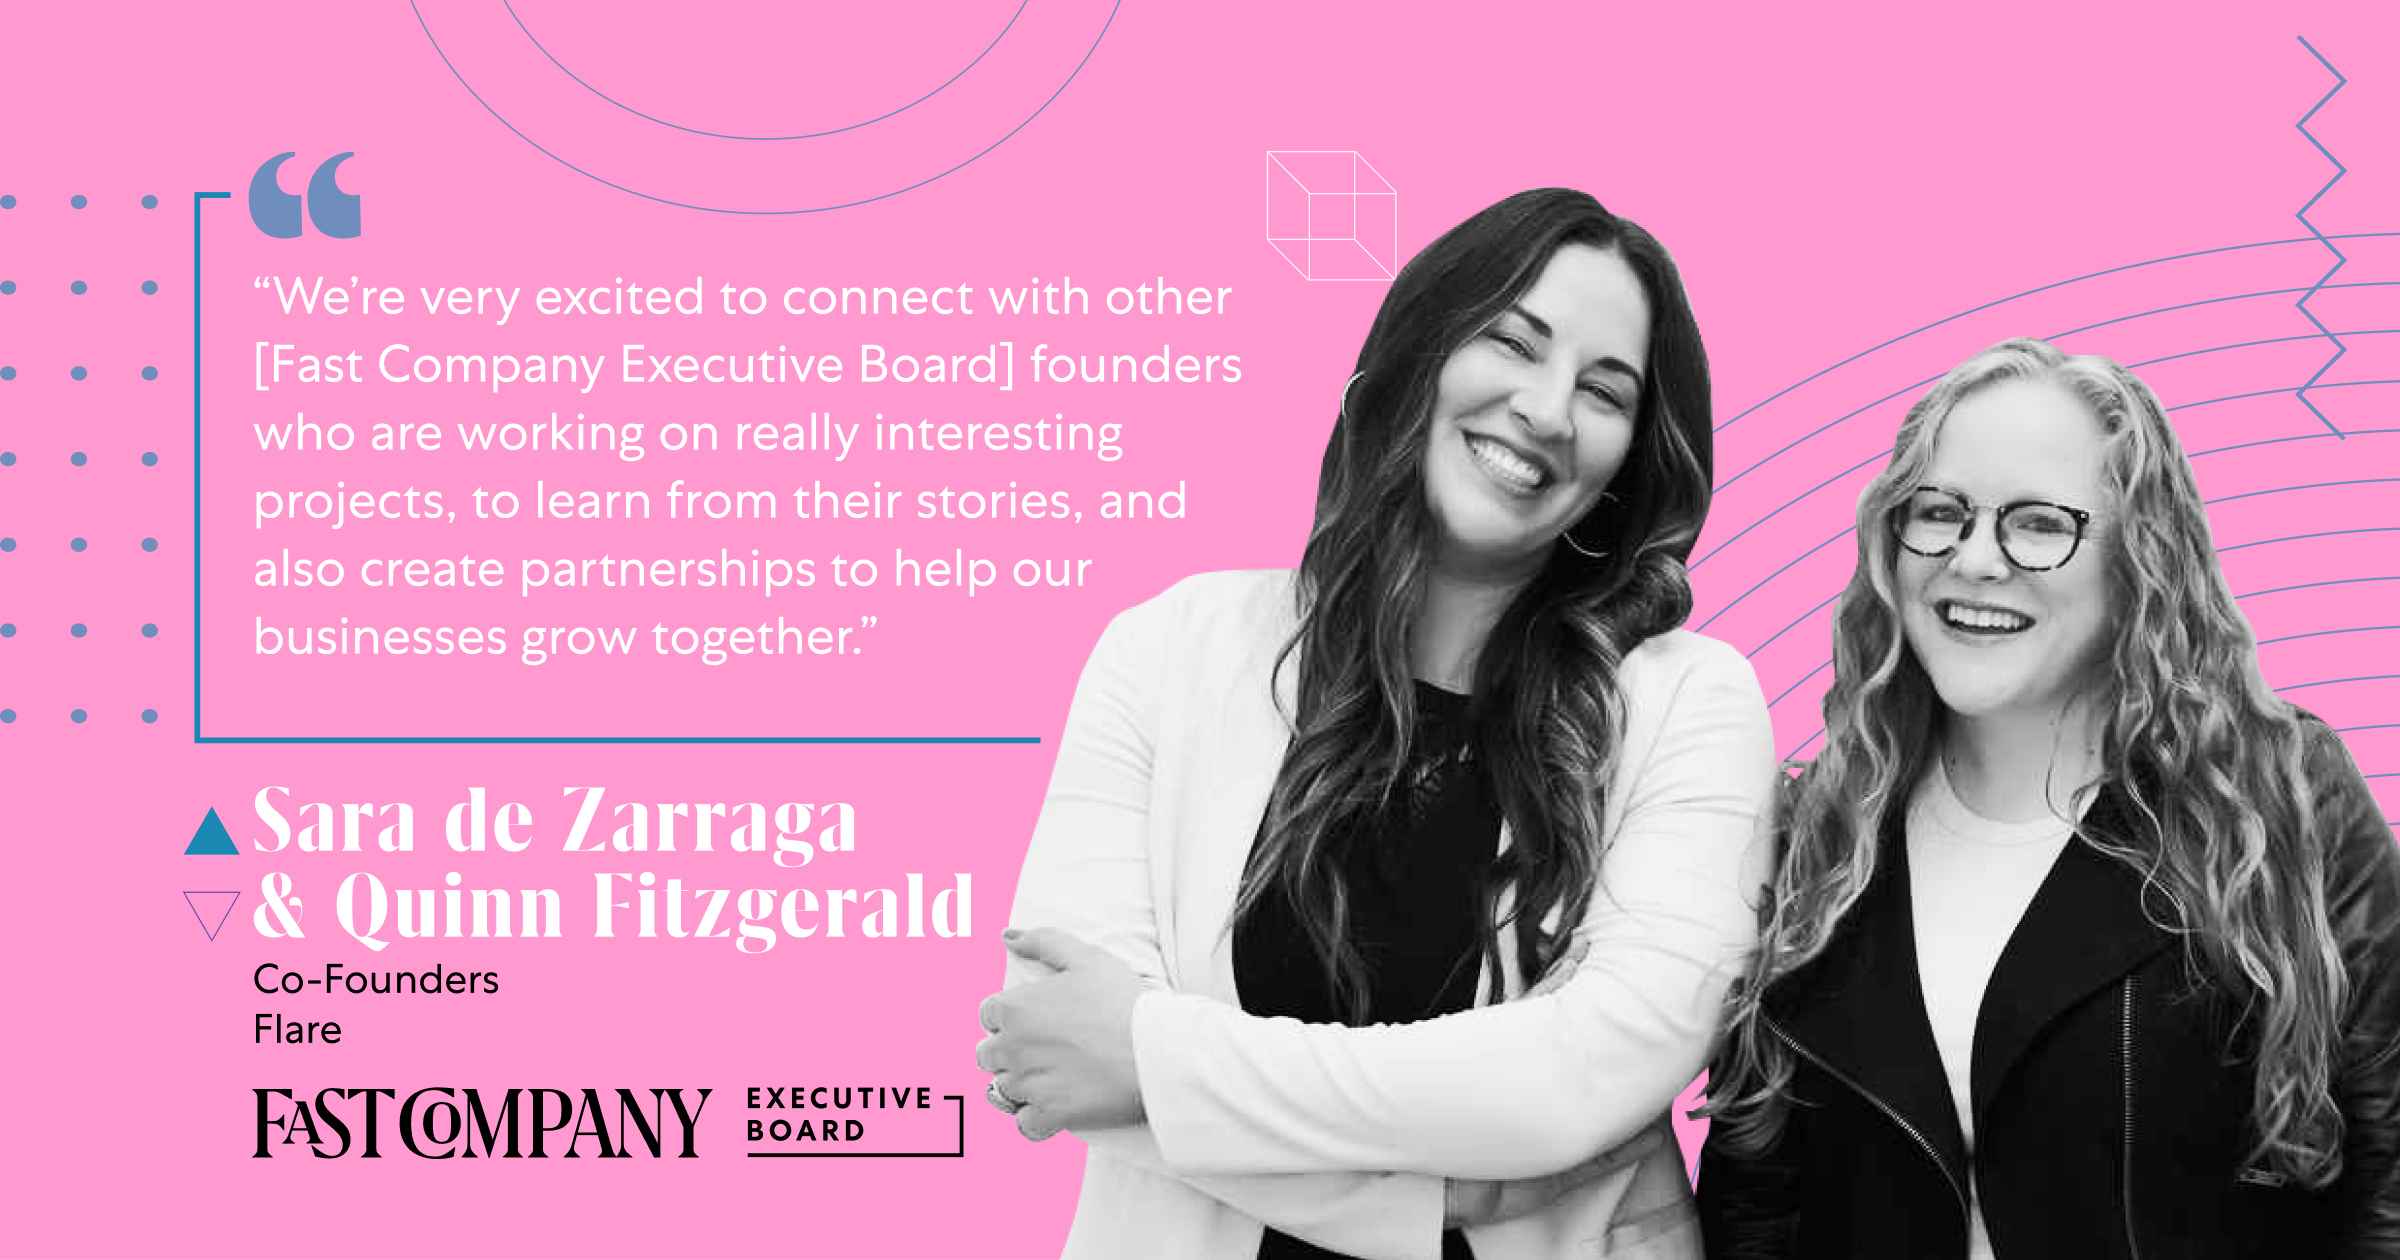 Connecting With Founders Entices Quinn Fitzgerald and Sara de Zarraga